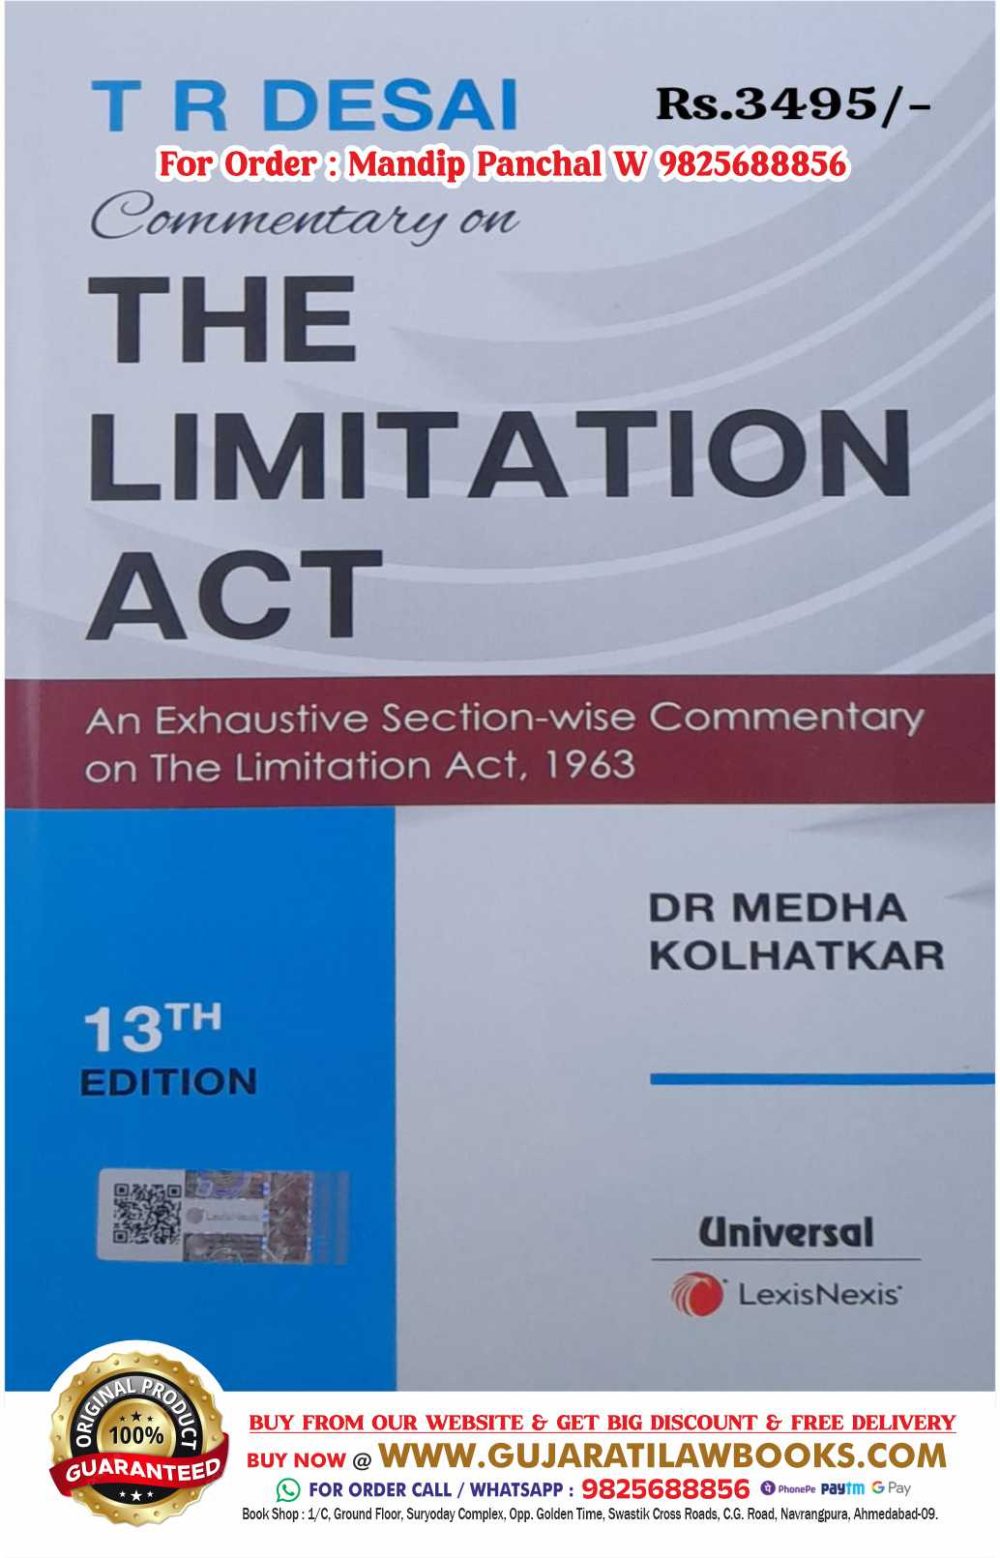 T R Desai - Commentary on THE LIMITATION ACT - An Exhaustive Section-wise Commentary - Latest 13th Edition April 2024 - Universal LexisNexis